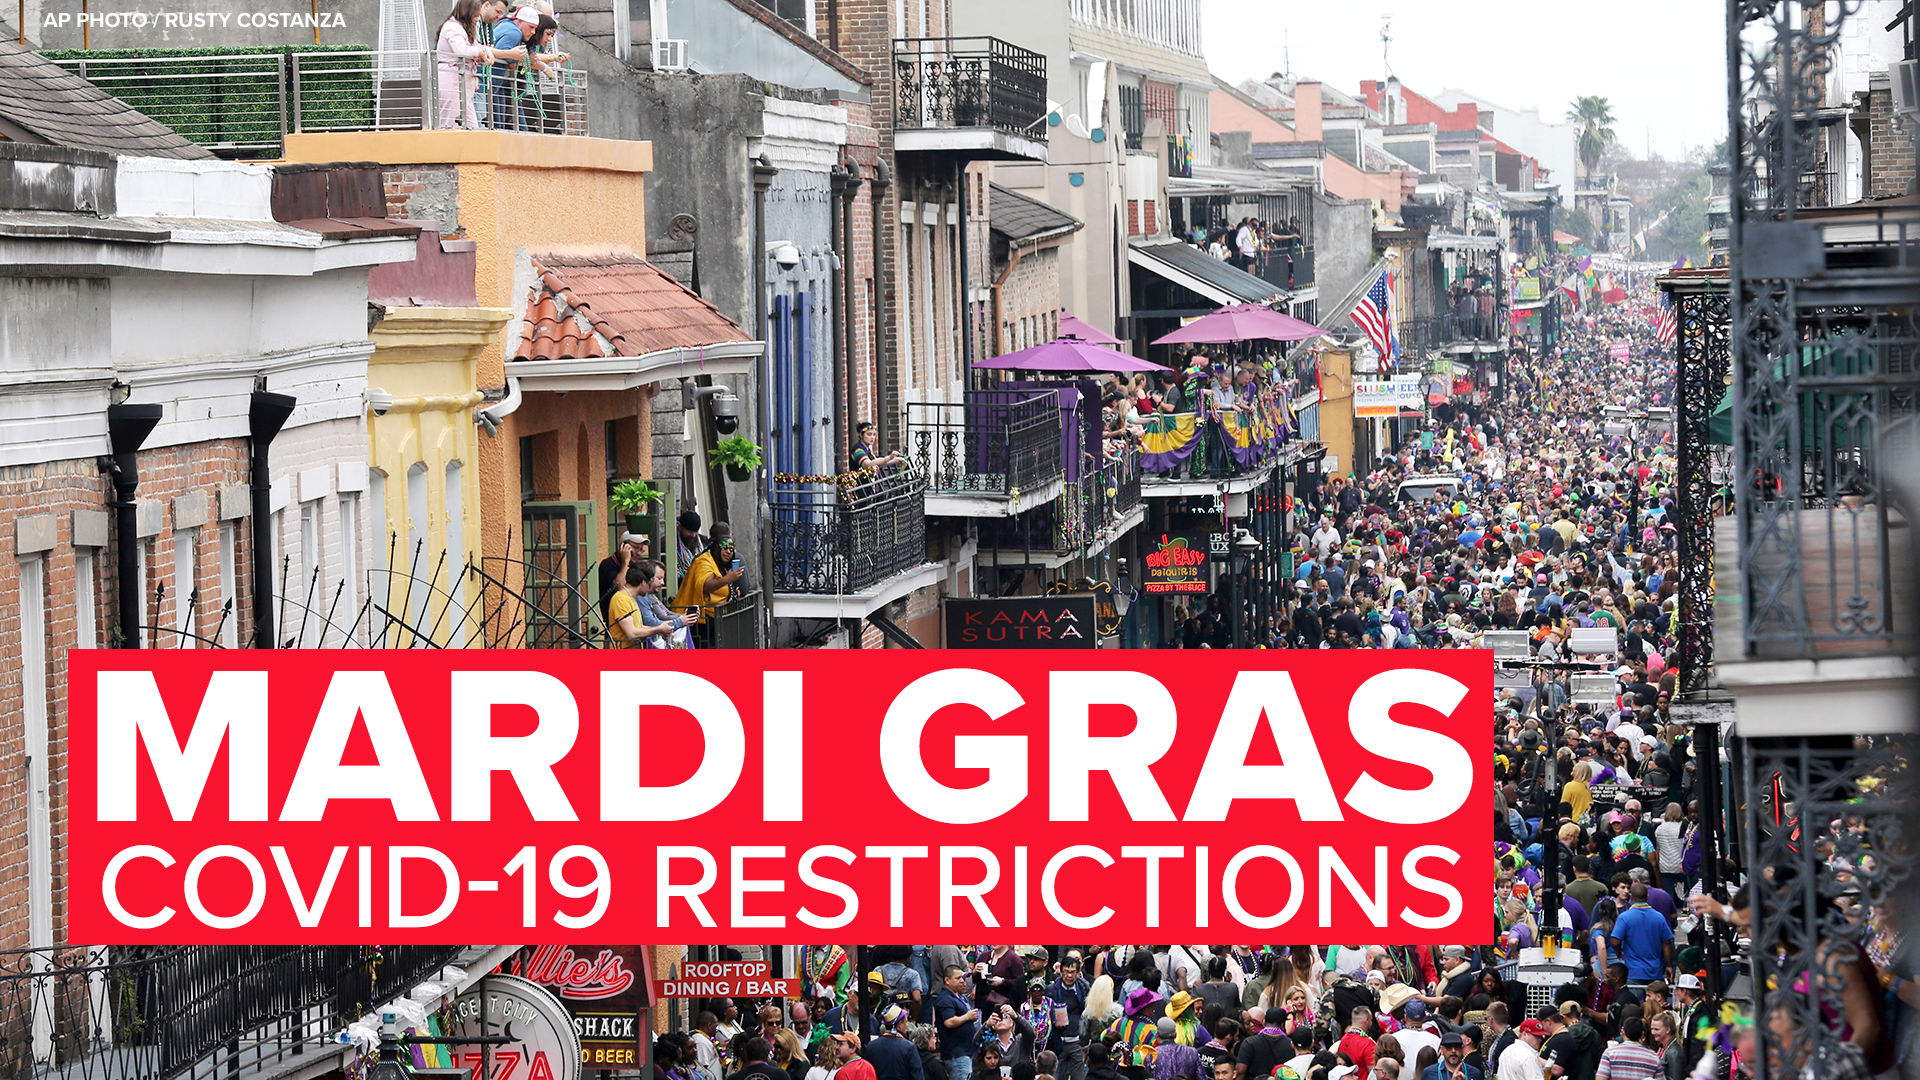 New Orleans will continue its vaccine mandate through at least Mardi Gras, the mayor's office announced on Tuesday.